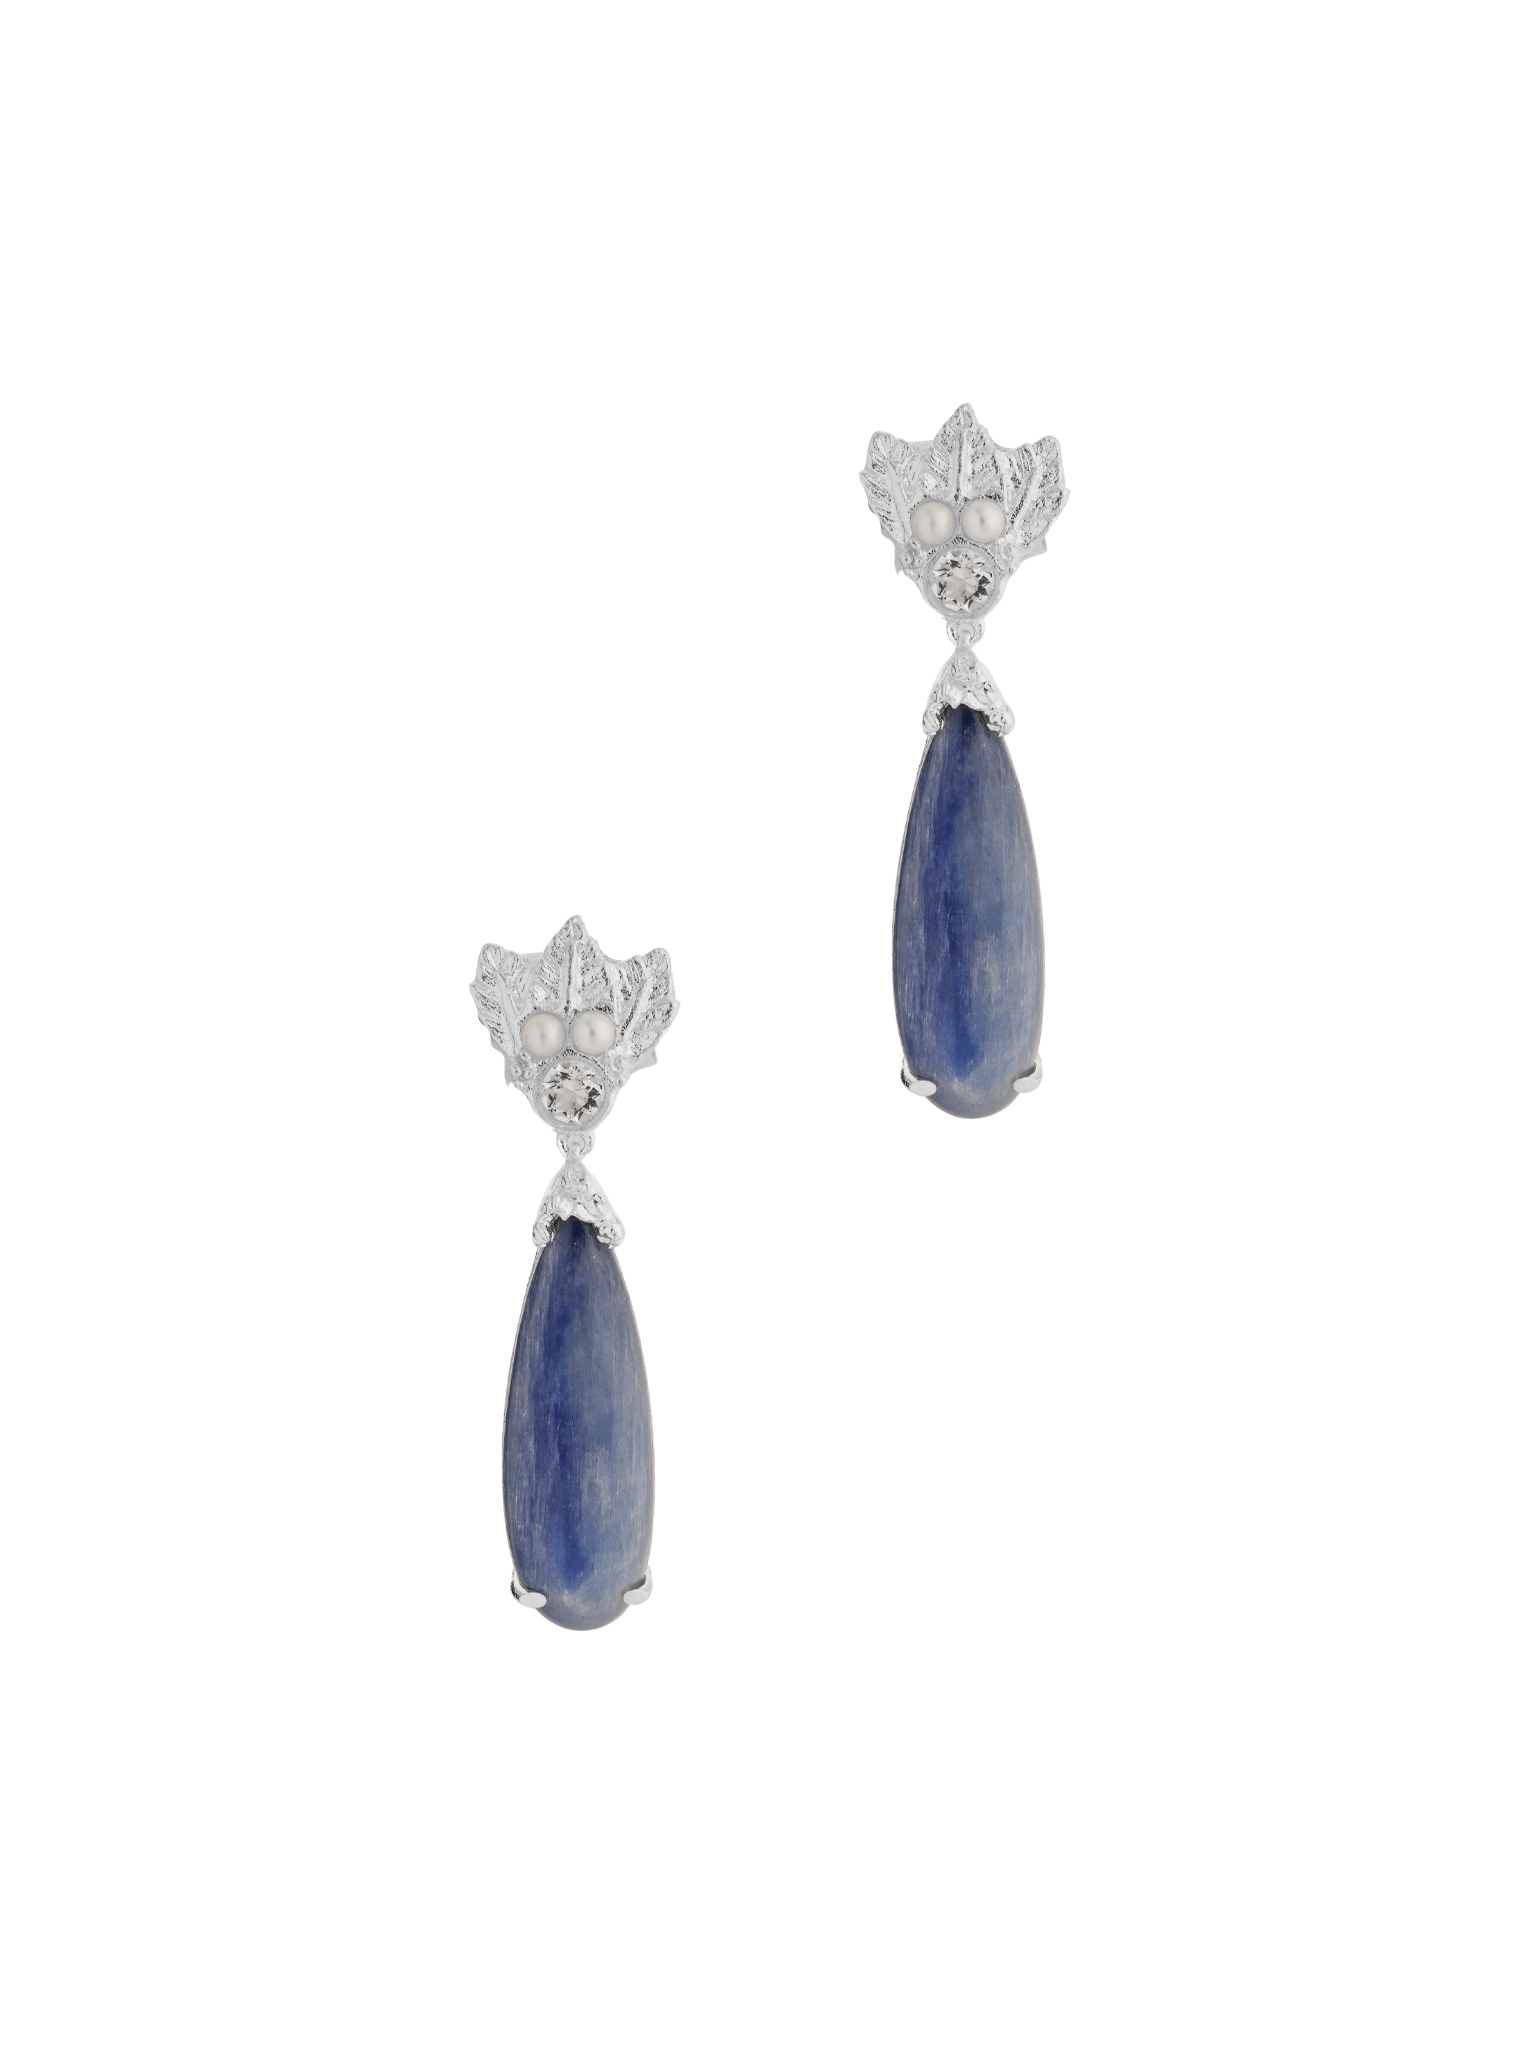 A pair of The Muse III Kyanite earrings, made of silver, by Cremilde Bispo Jewellery.